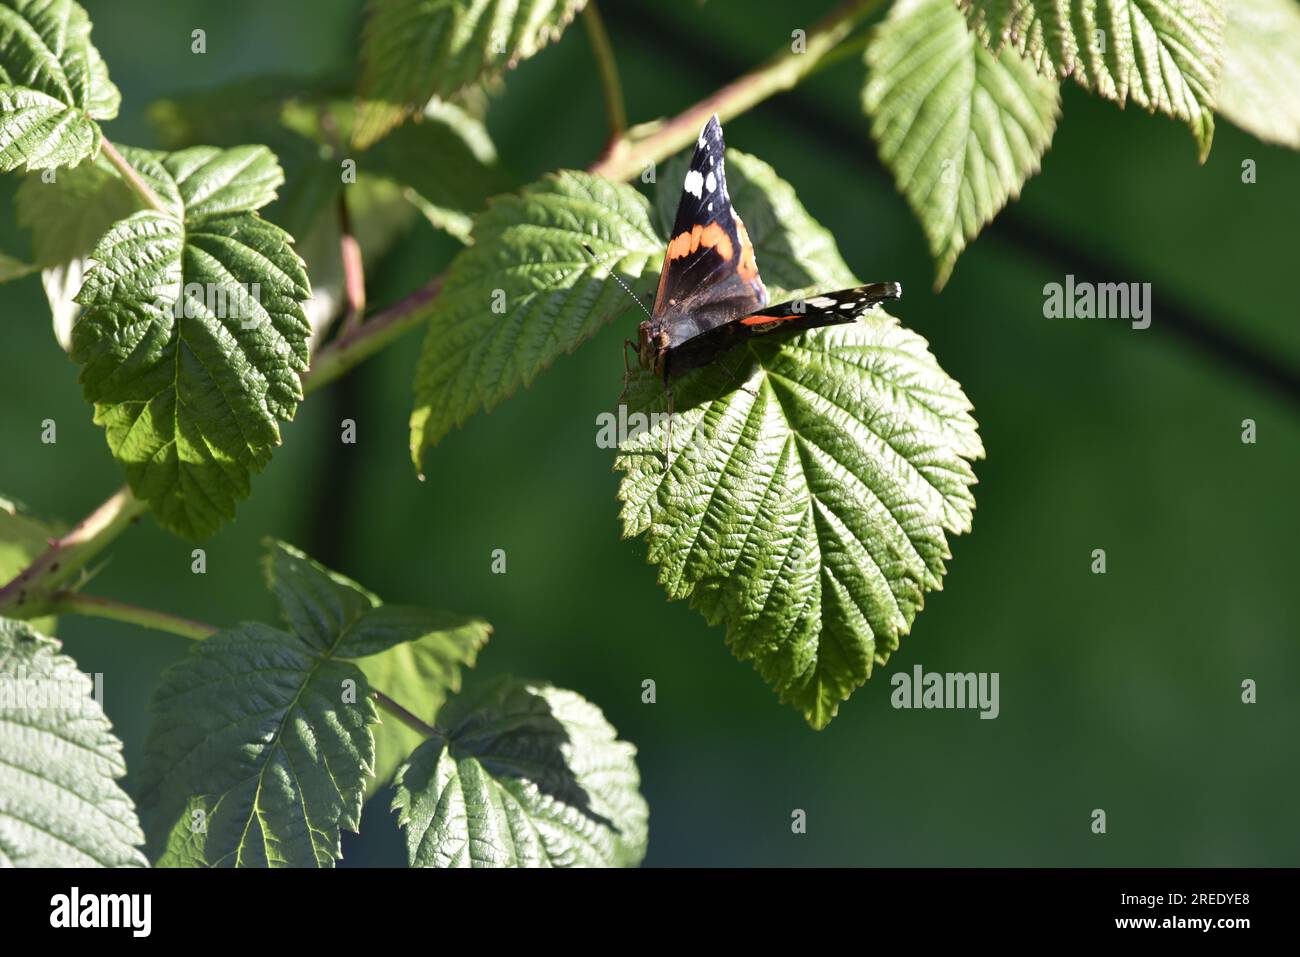 Upper Foreground Close-Up Image of a Red Admiral Butterfly (Vanessa atalanta) Facing Camera from a Sunny Raspberry Leaf, against a Green Background Stock Photo